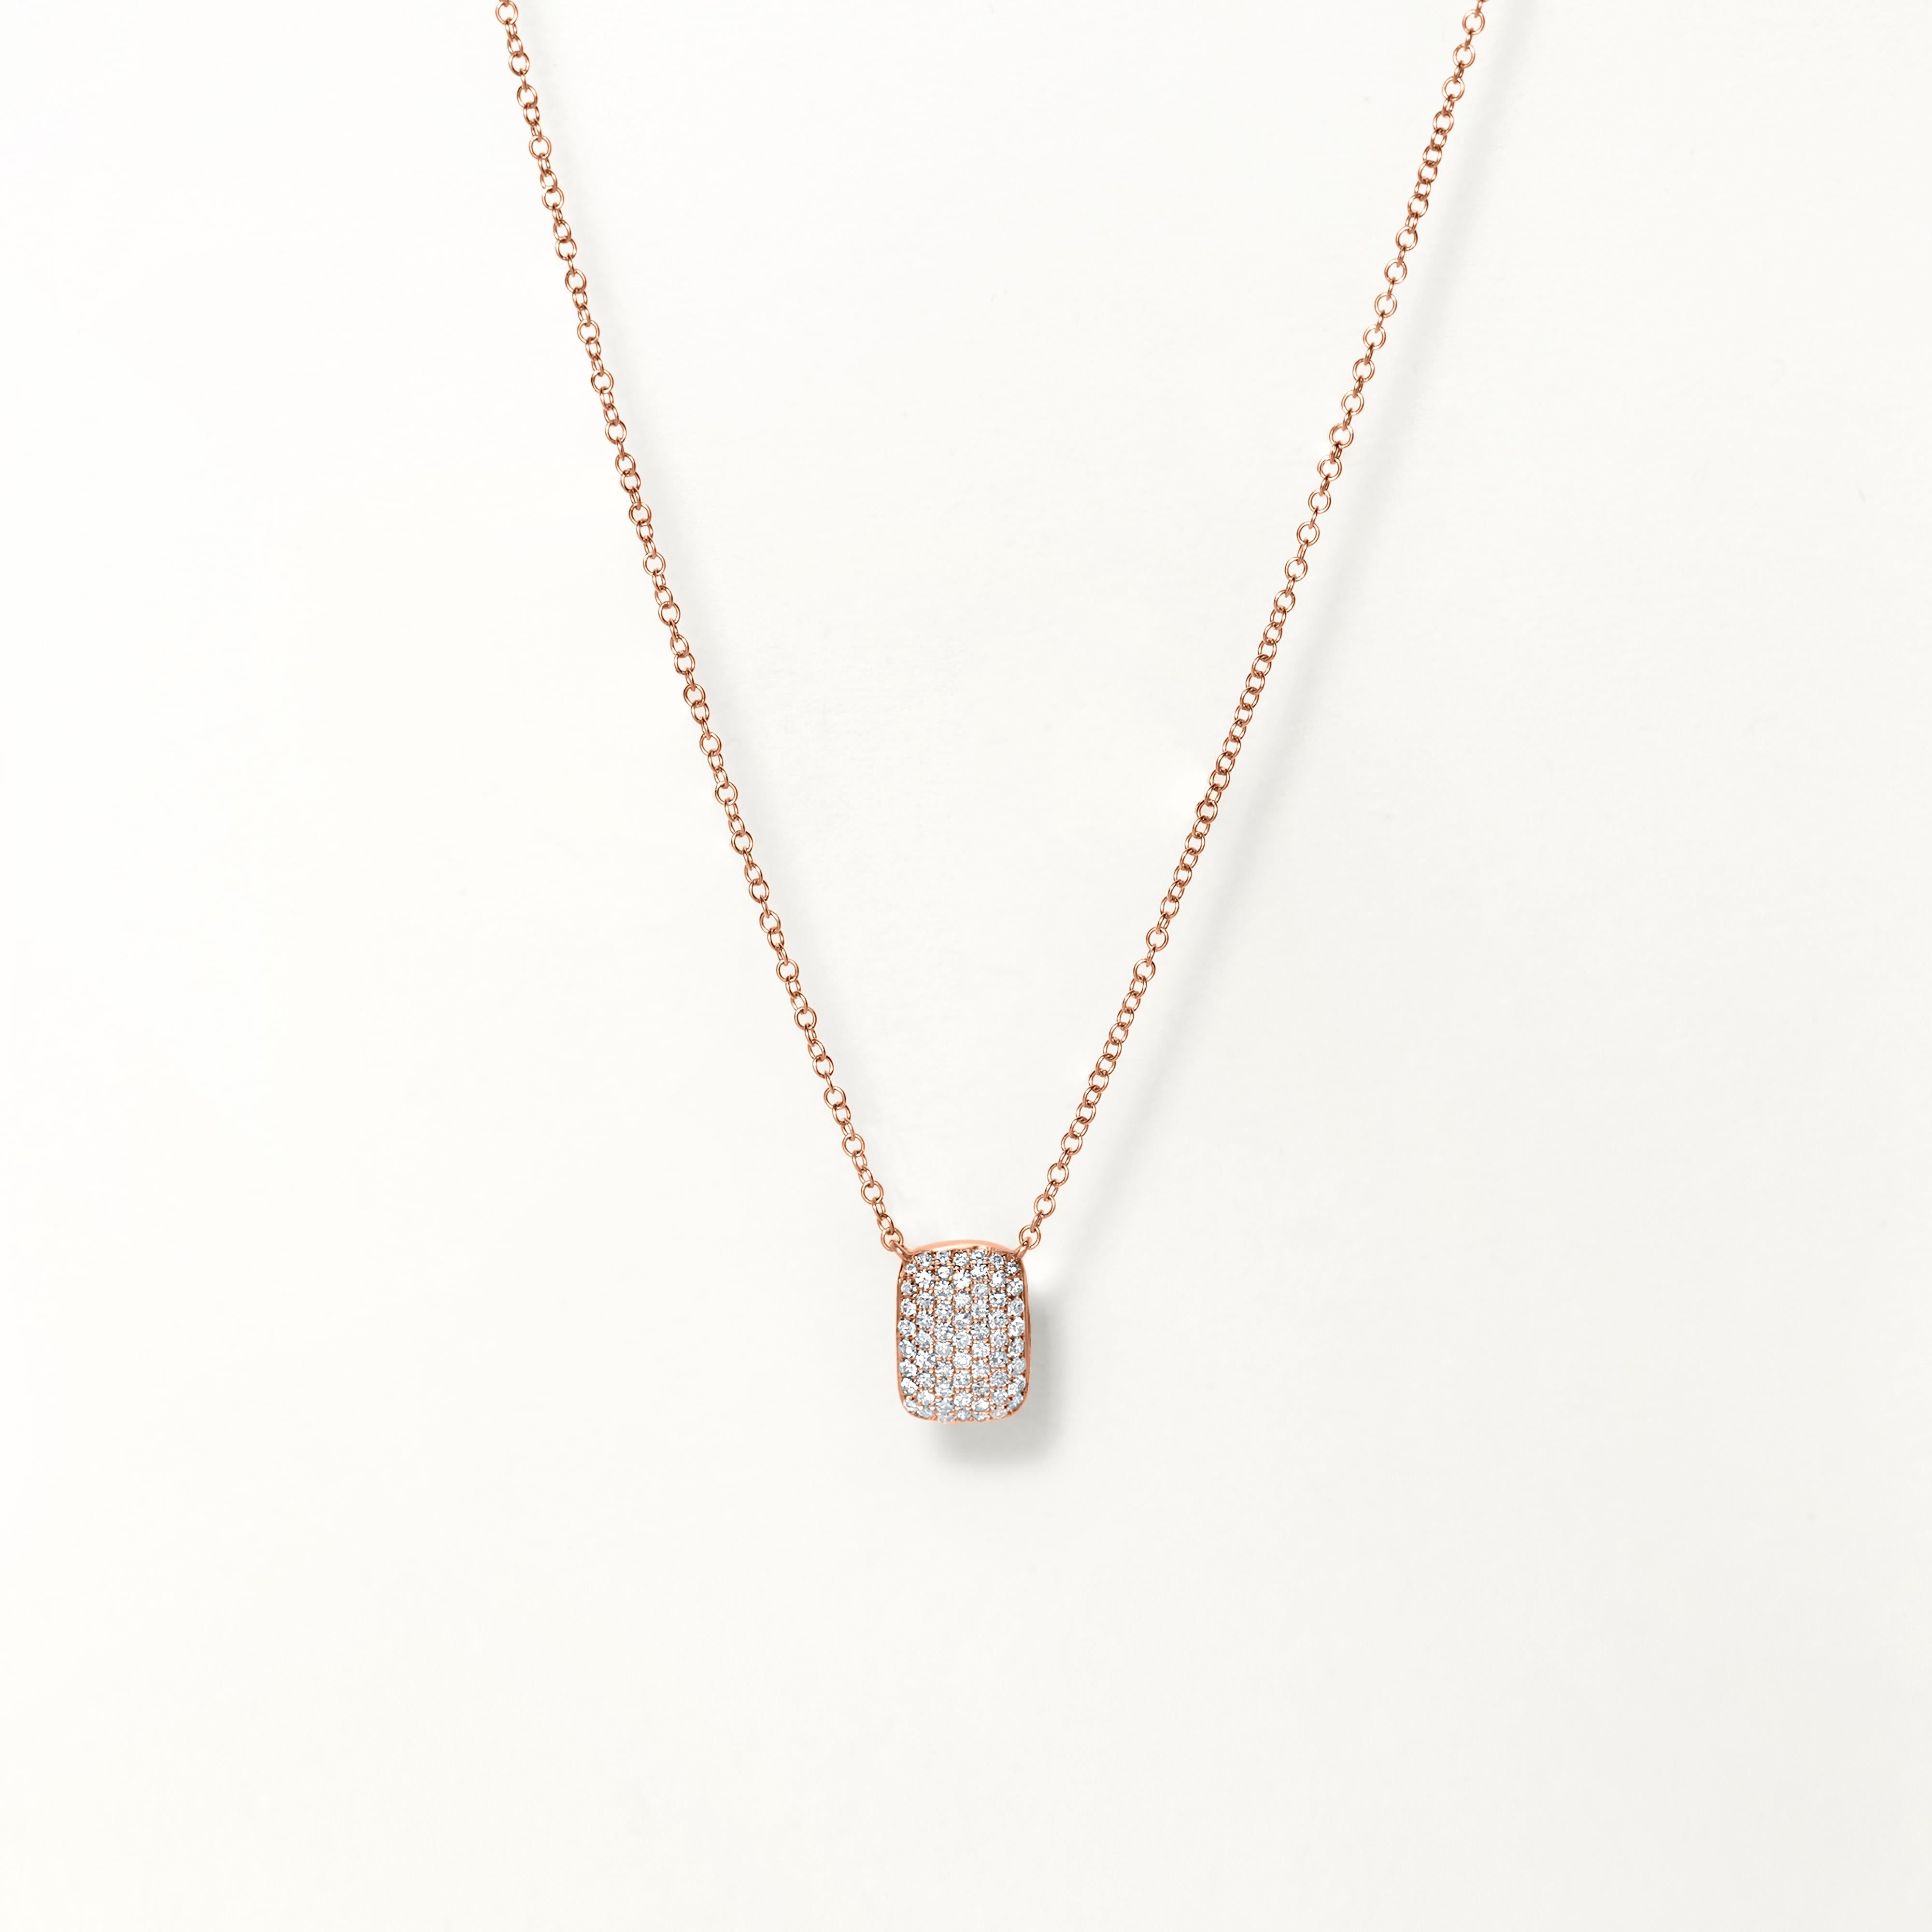 Round Cut Luxle Rectangle Pendant Necklace with 0.21 Carat Round Diamond in 14k Rose Gold For Sale